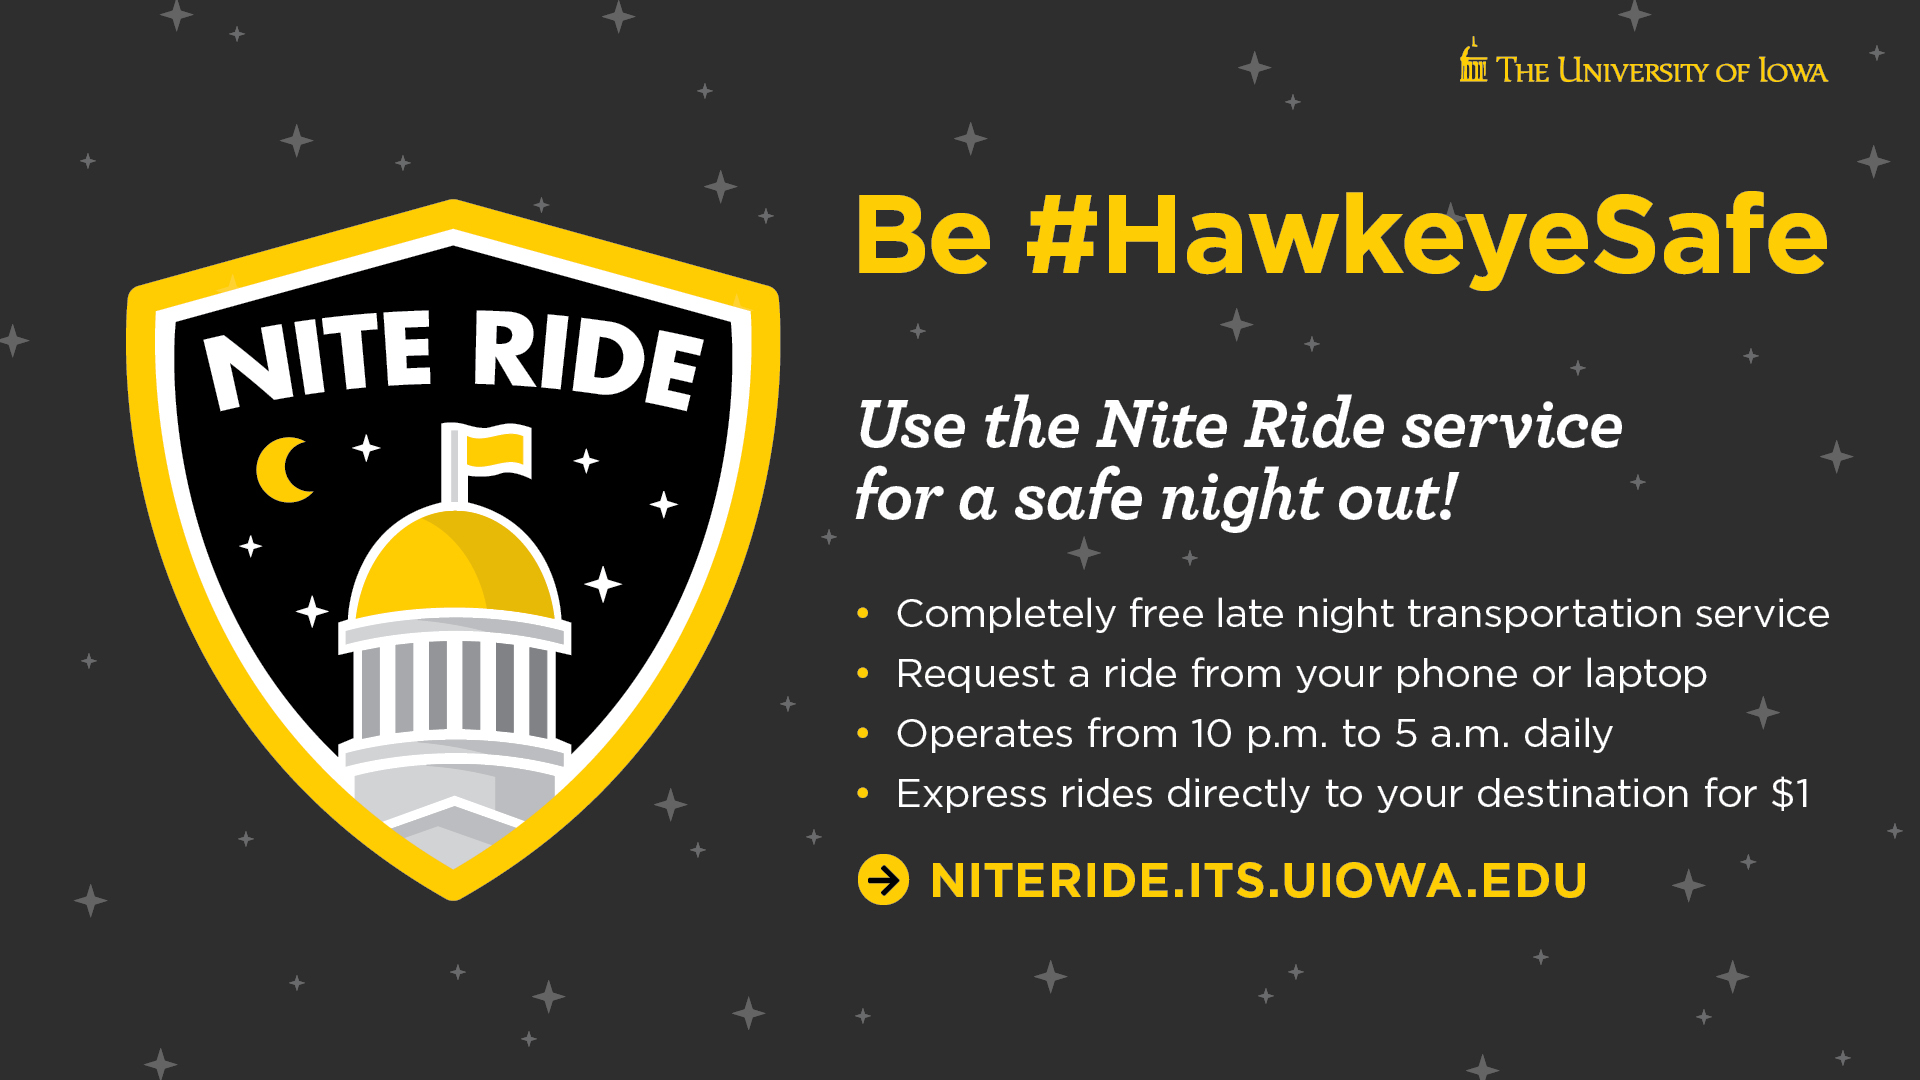 Use the Nite Ride Services for a safe night out!